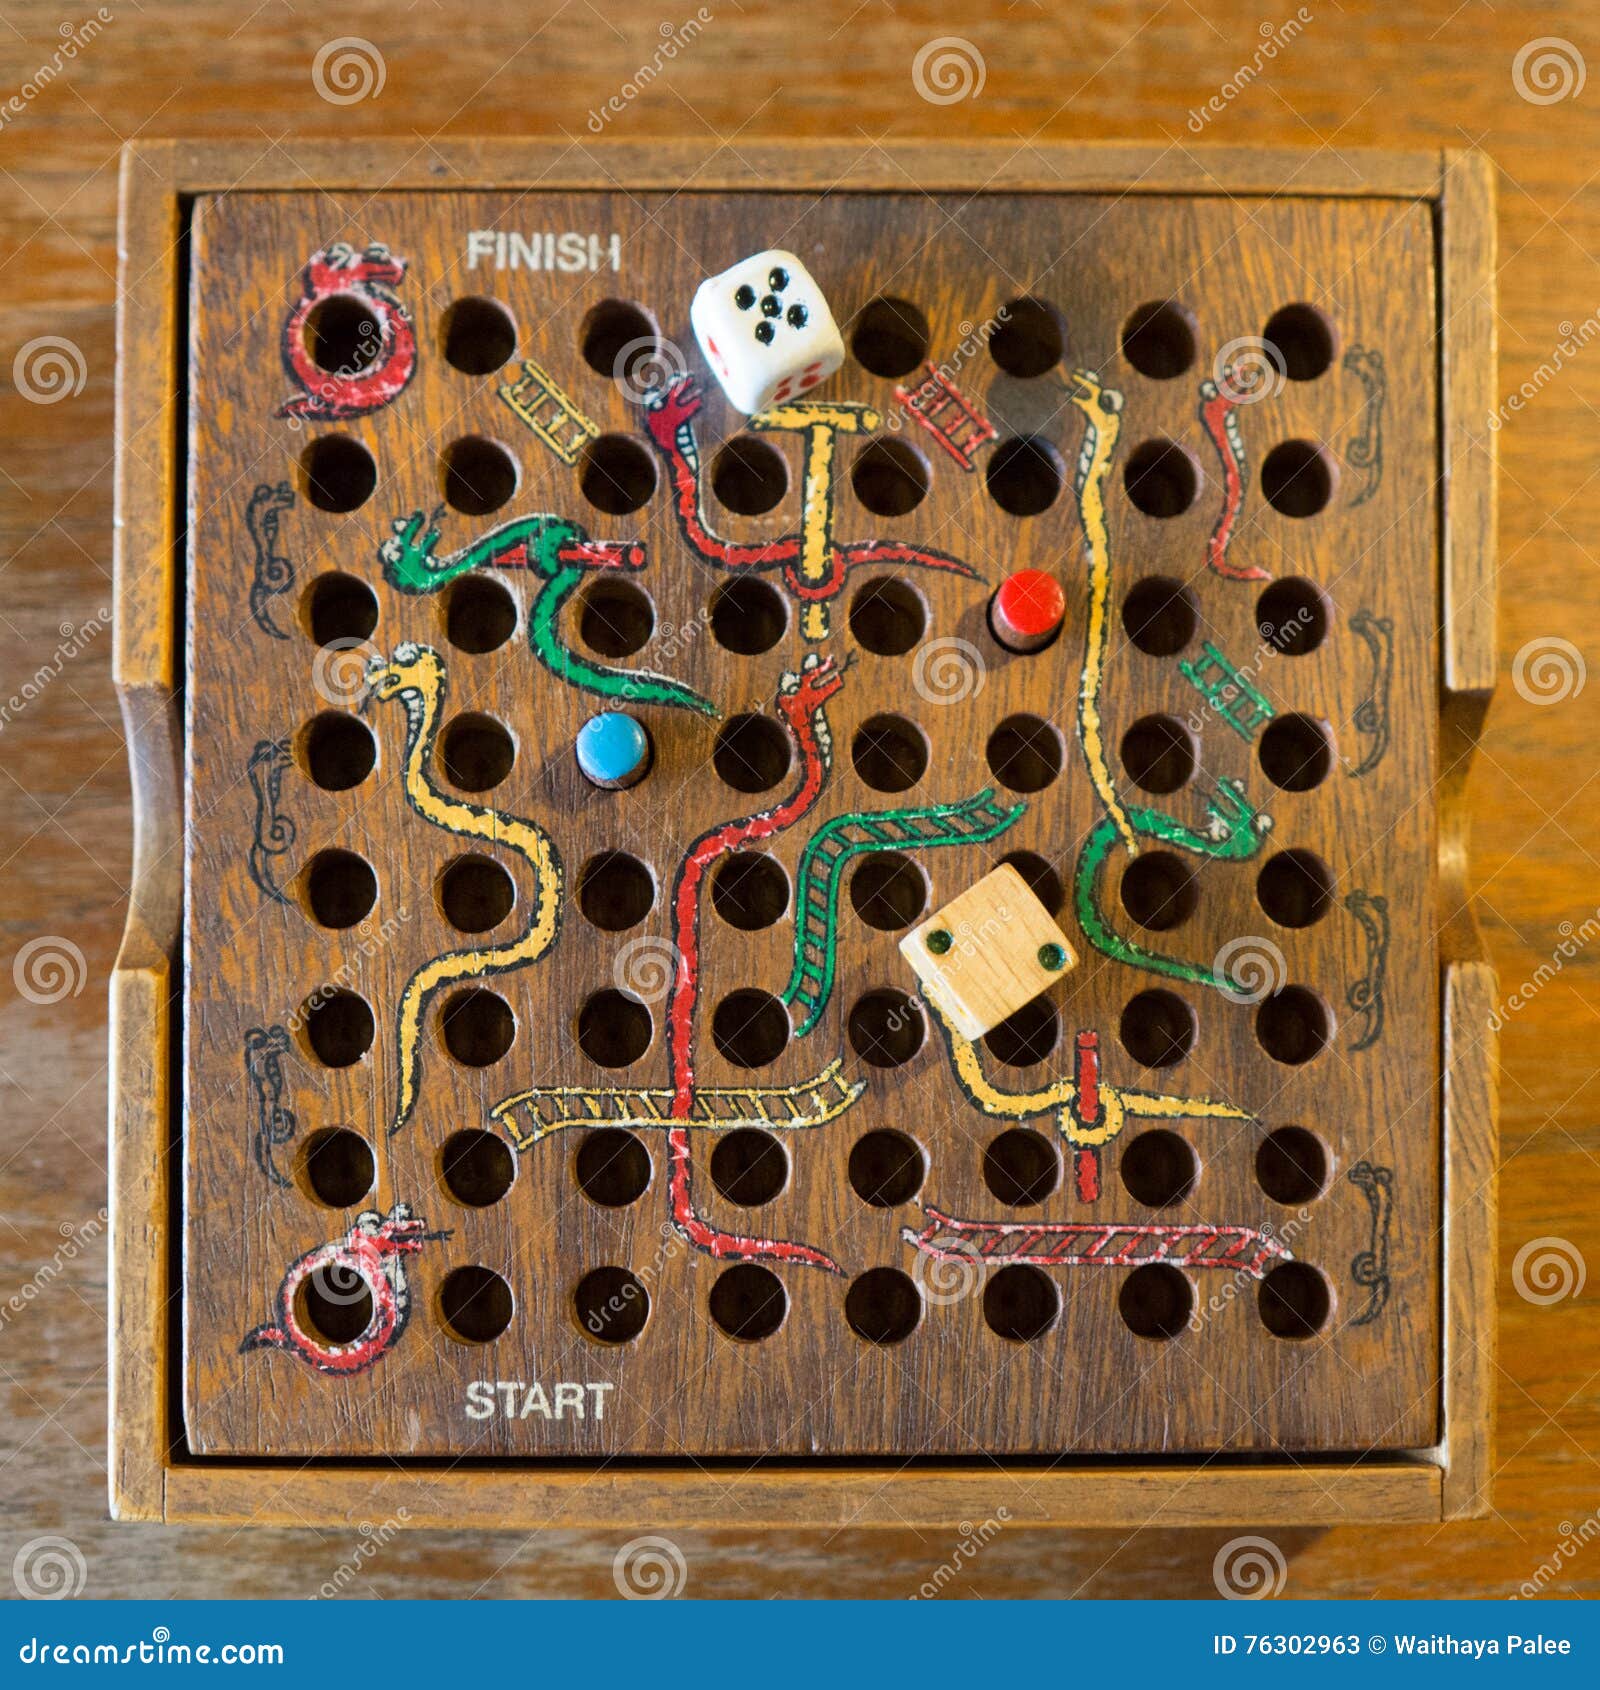 Snakes And Ladders Stock Image Image Of Icon Easy Ladders